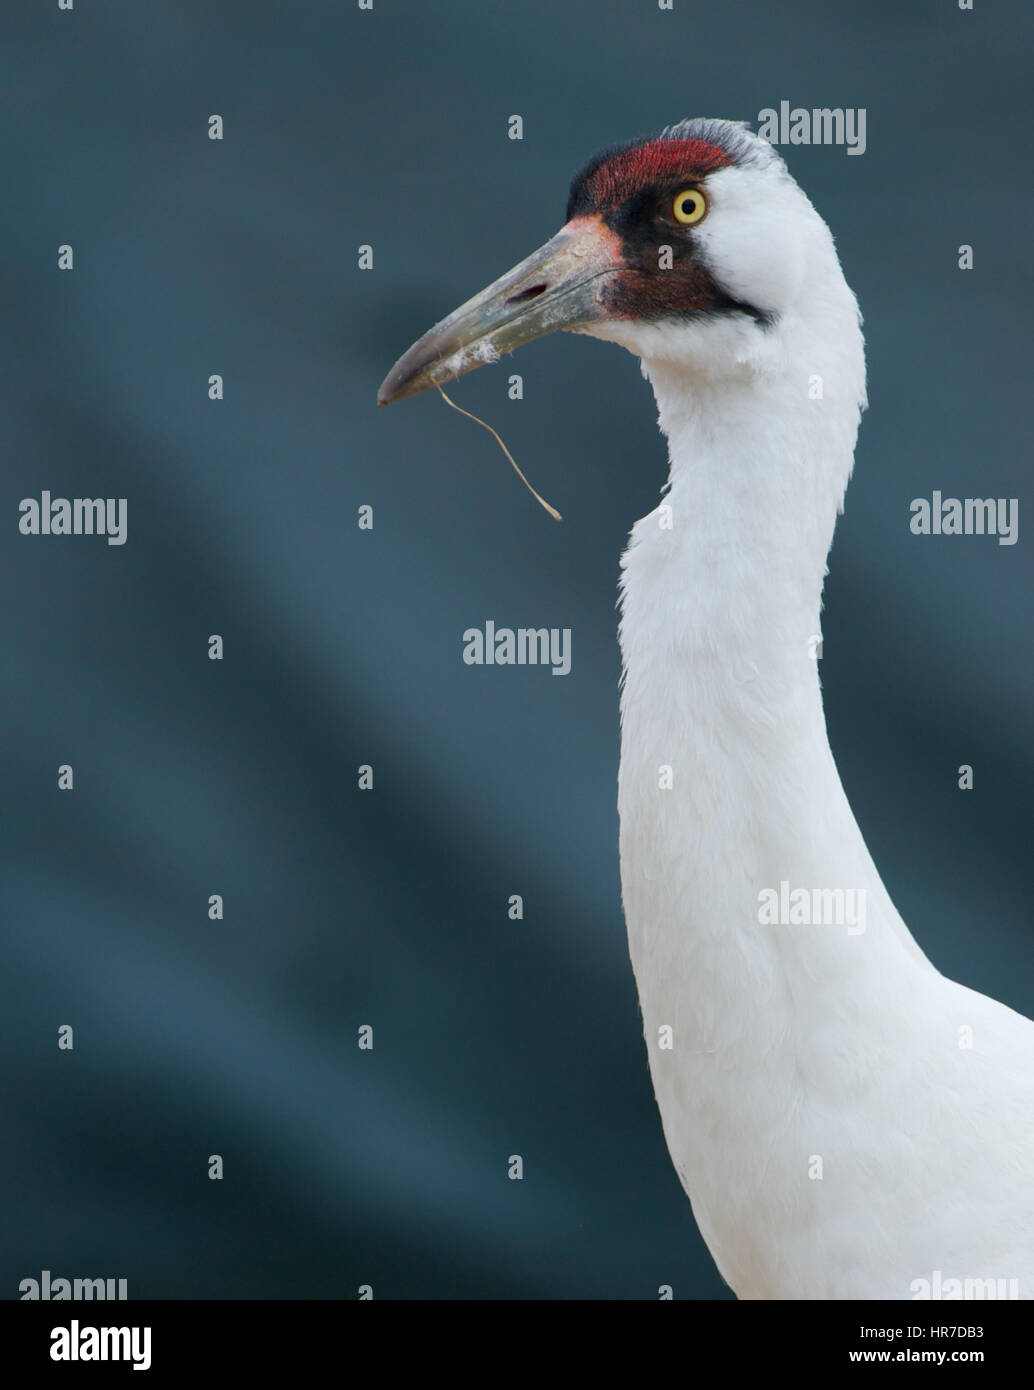 Critically Endangered Whooping Crane, Grus americana, portrait with dark background Stock Photo